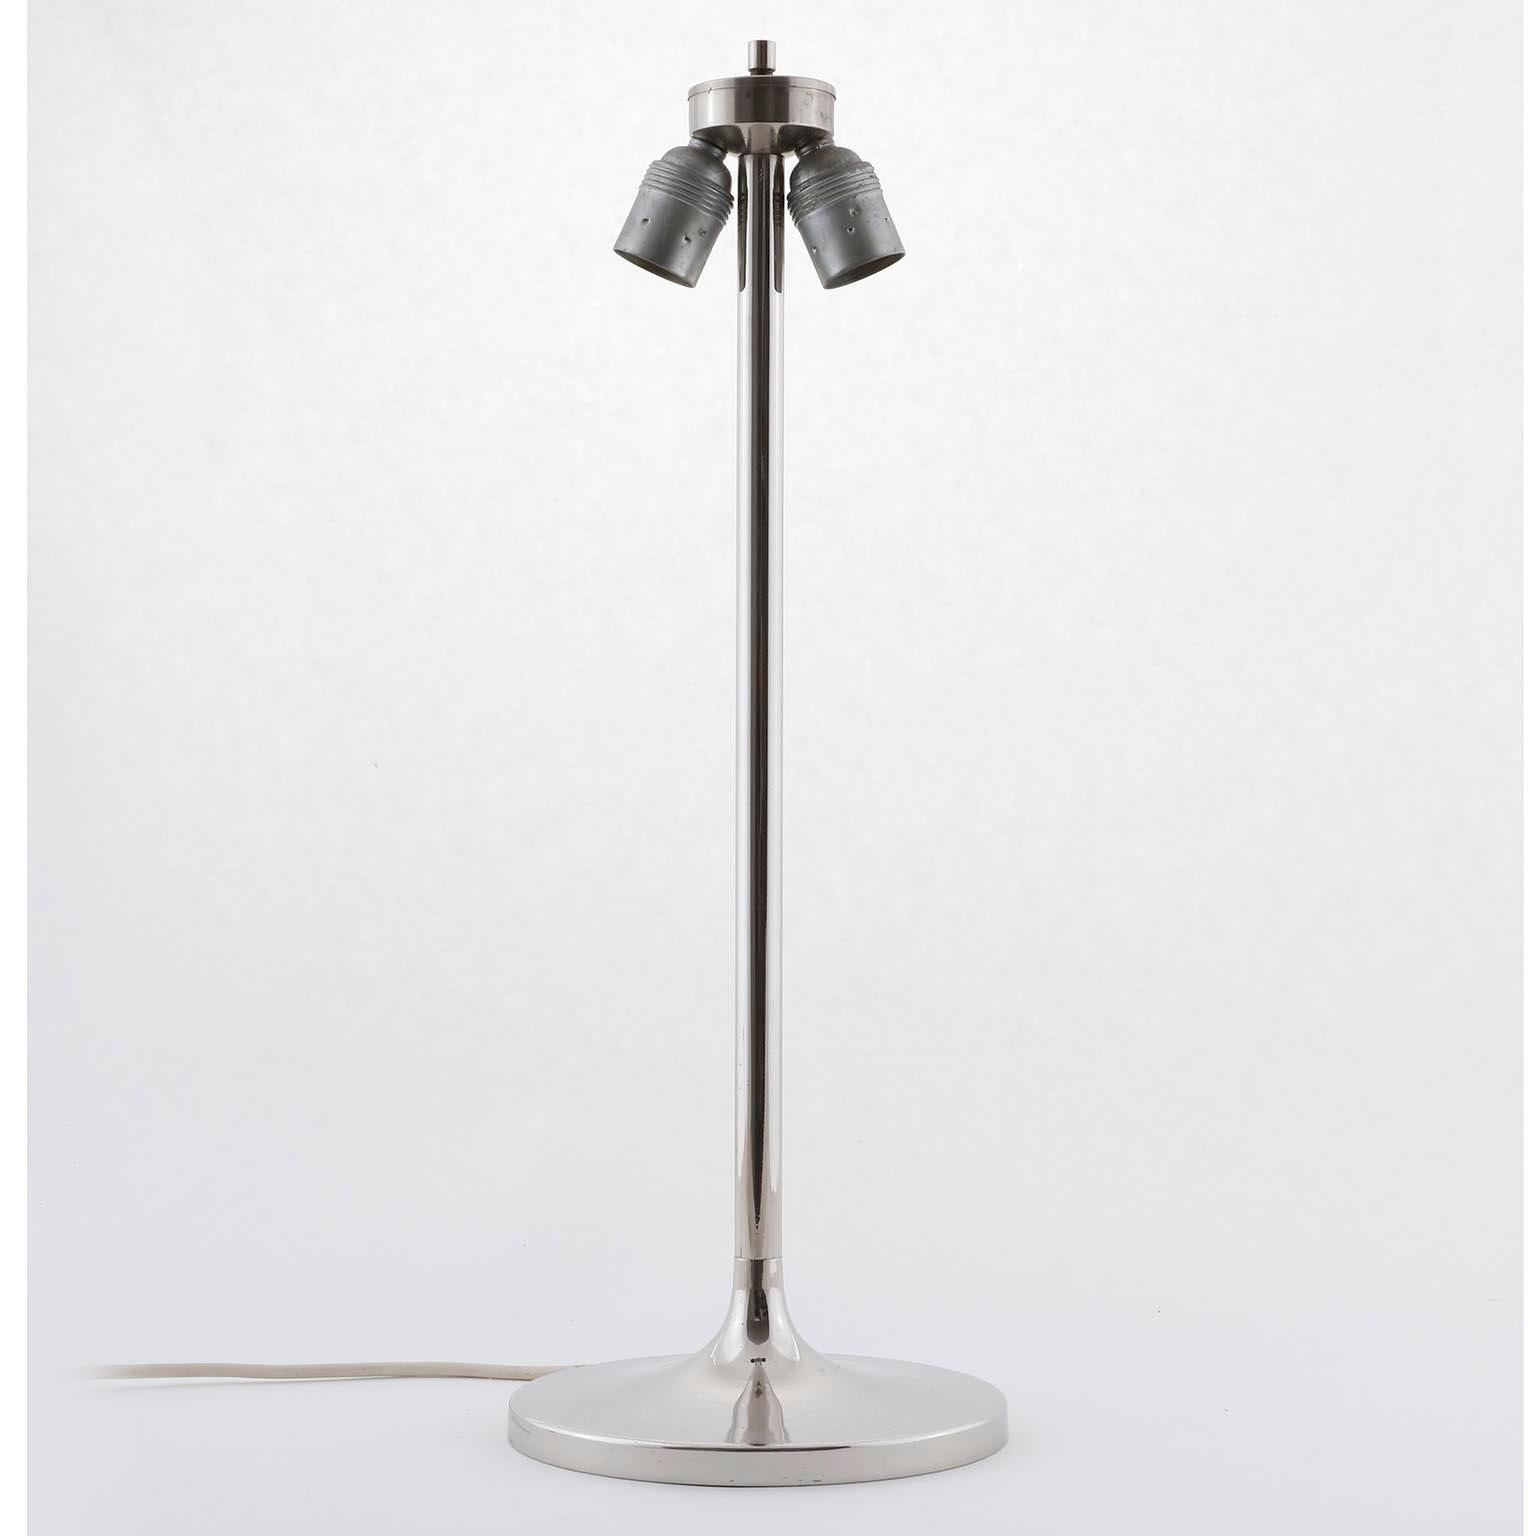 Late 20th Century Pair of Kalmar Table Lamps with Tulip Base, Polished Nickel, Beige Shade, 1970 For Sale